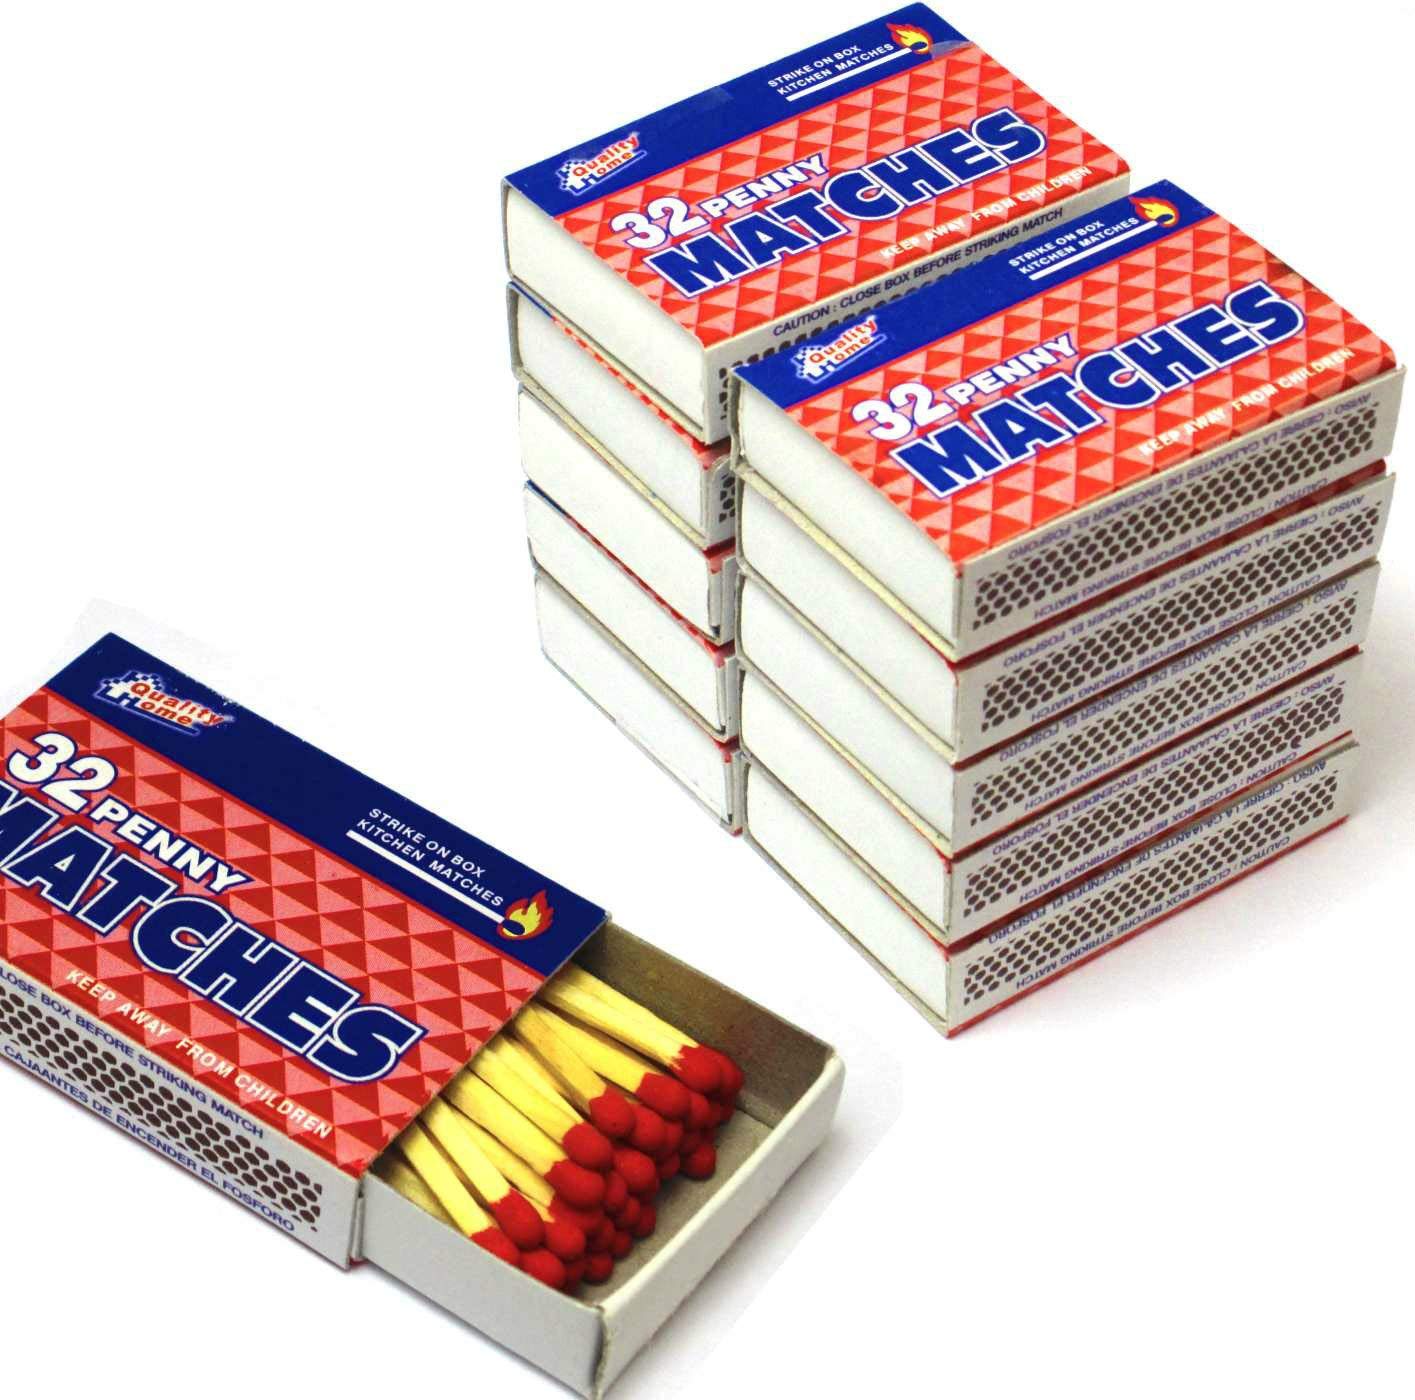 Amazon.com: 100 Packs Matches 32 Count Strike on Box Kitchen Camping ...